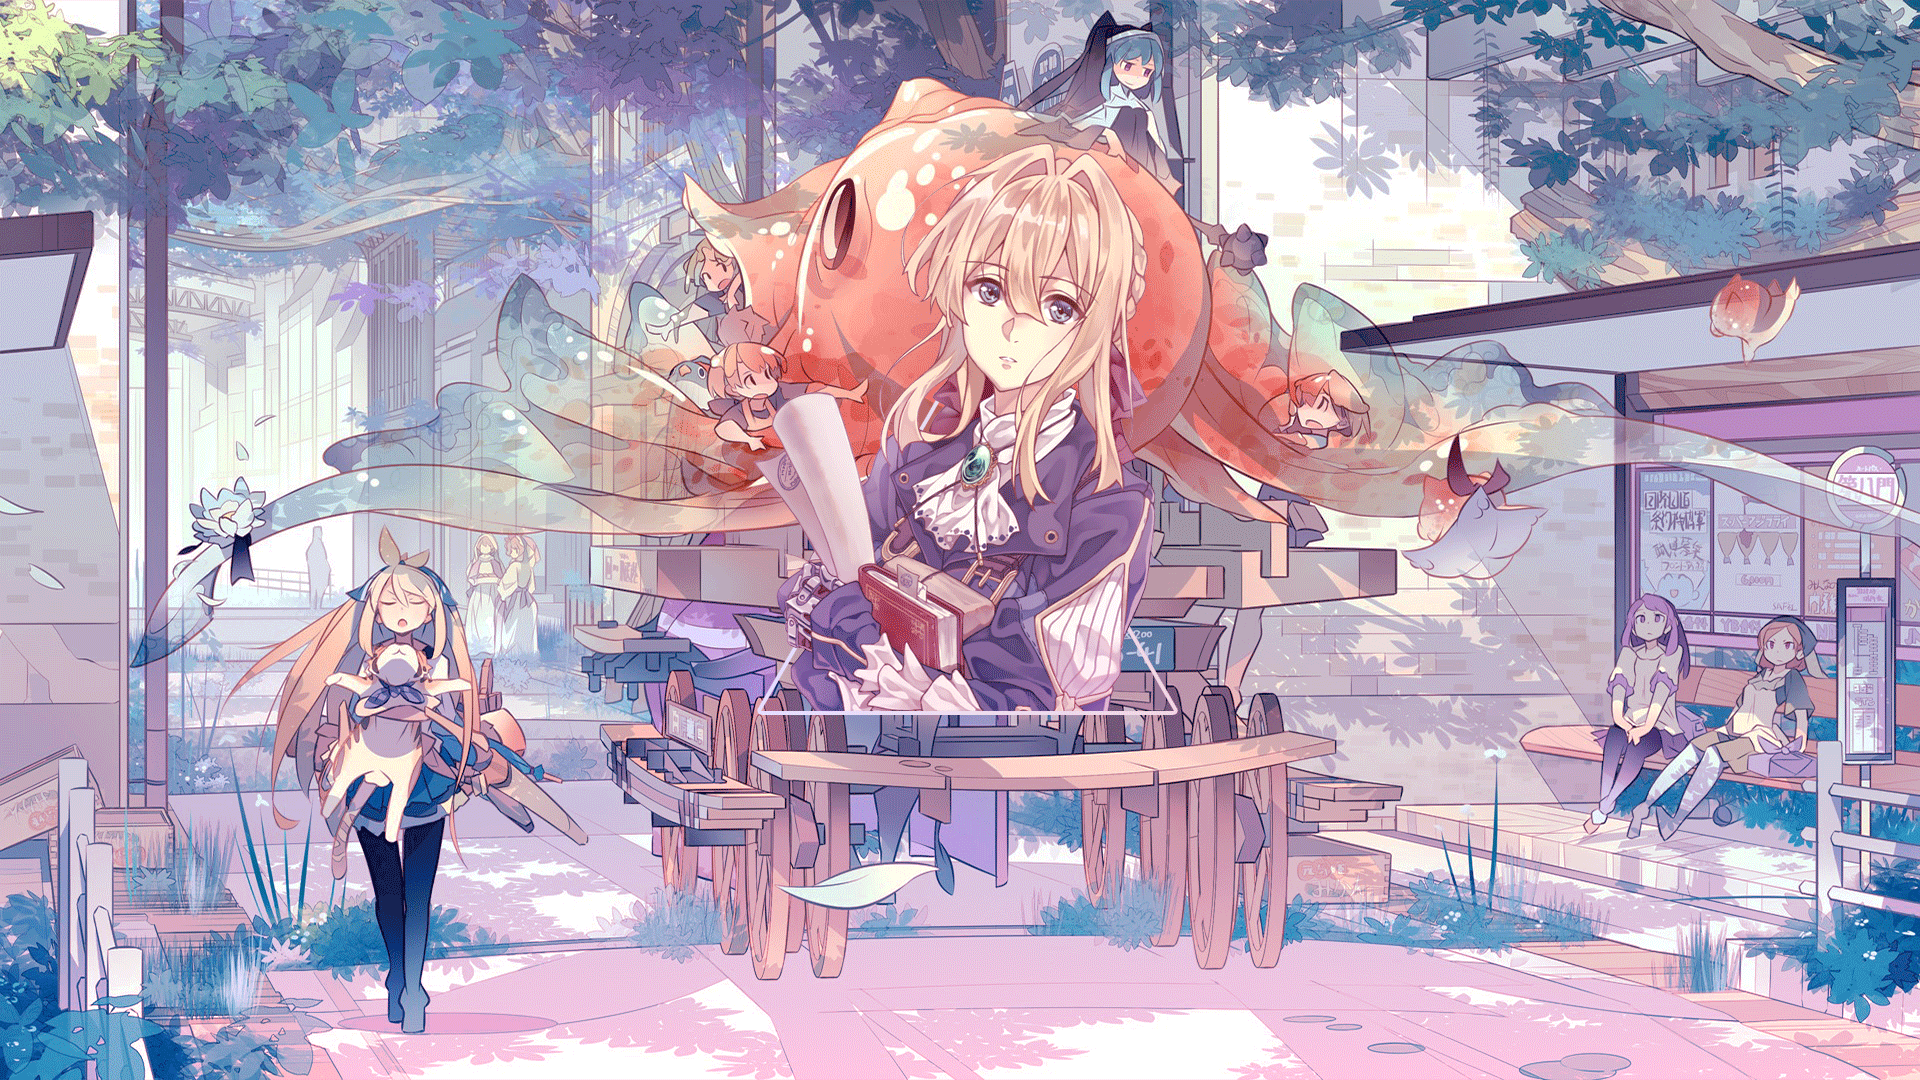 Anime Anime Girls Picture In Picture Platinum Conception Wallpapers Photoshop Violet Evergarden 1920x1080